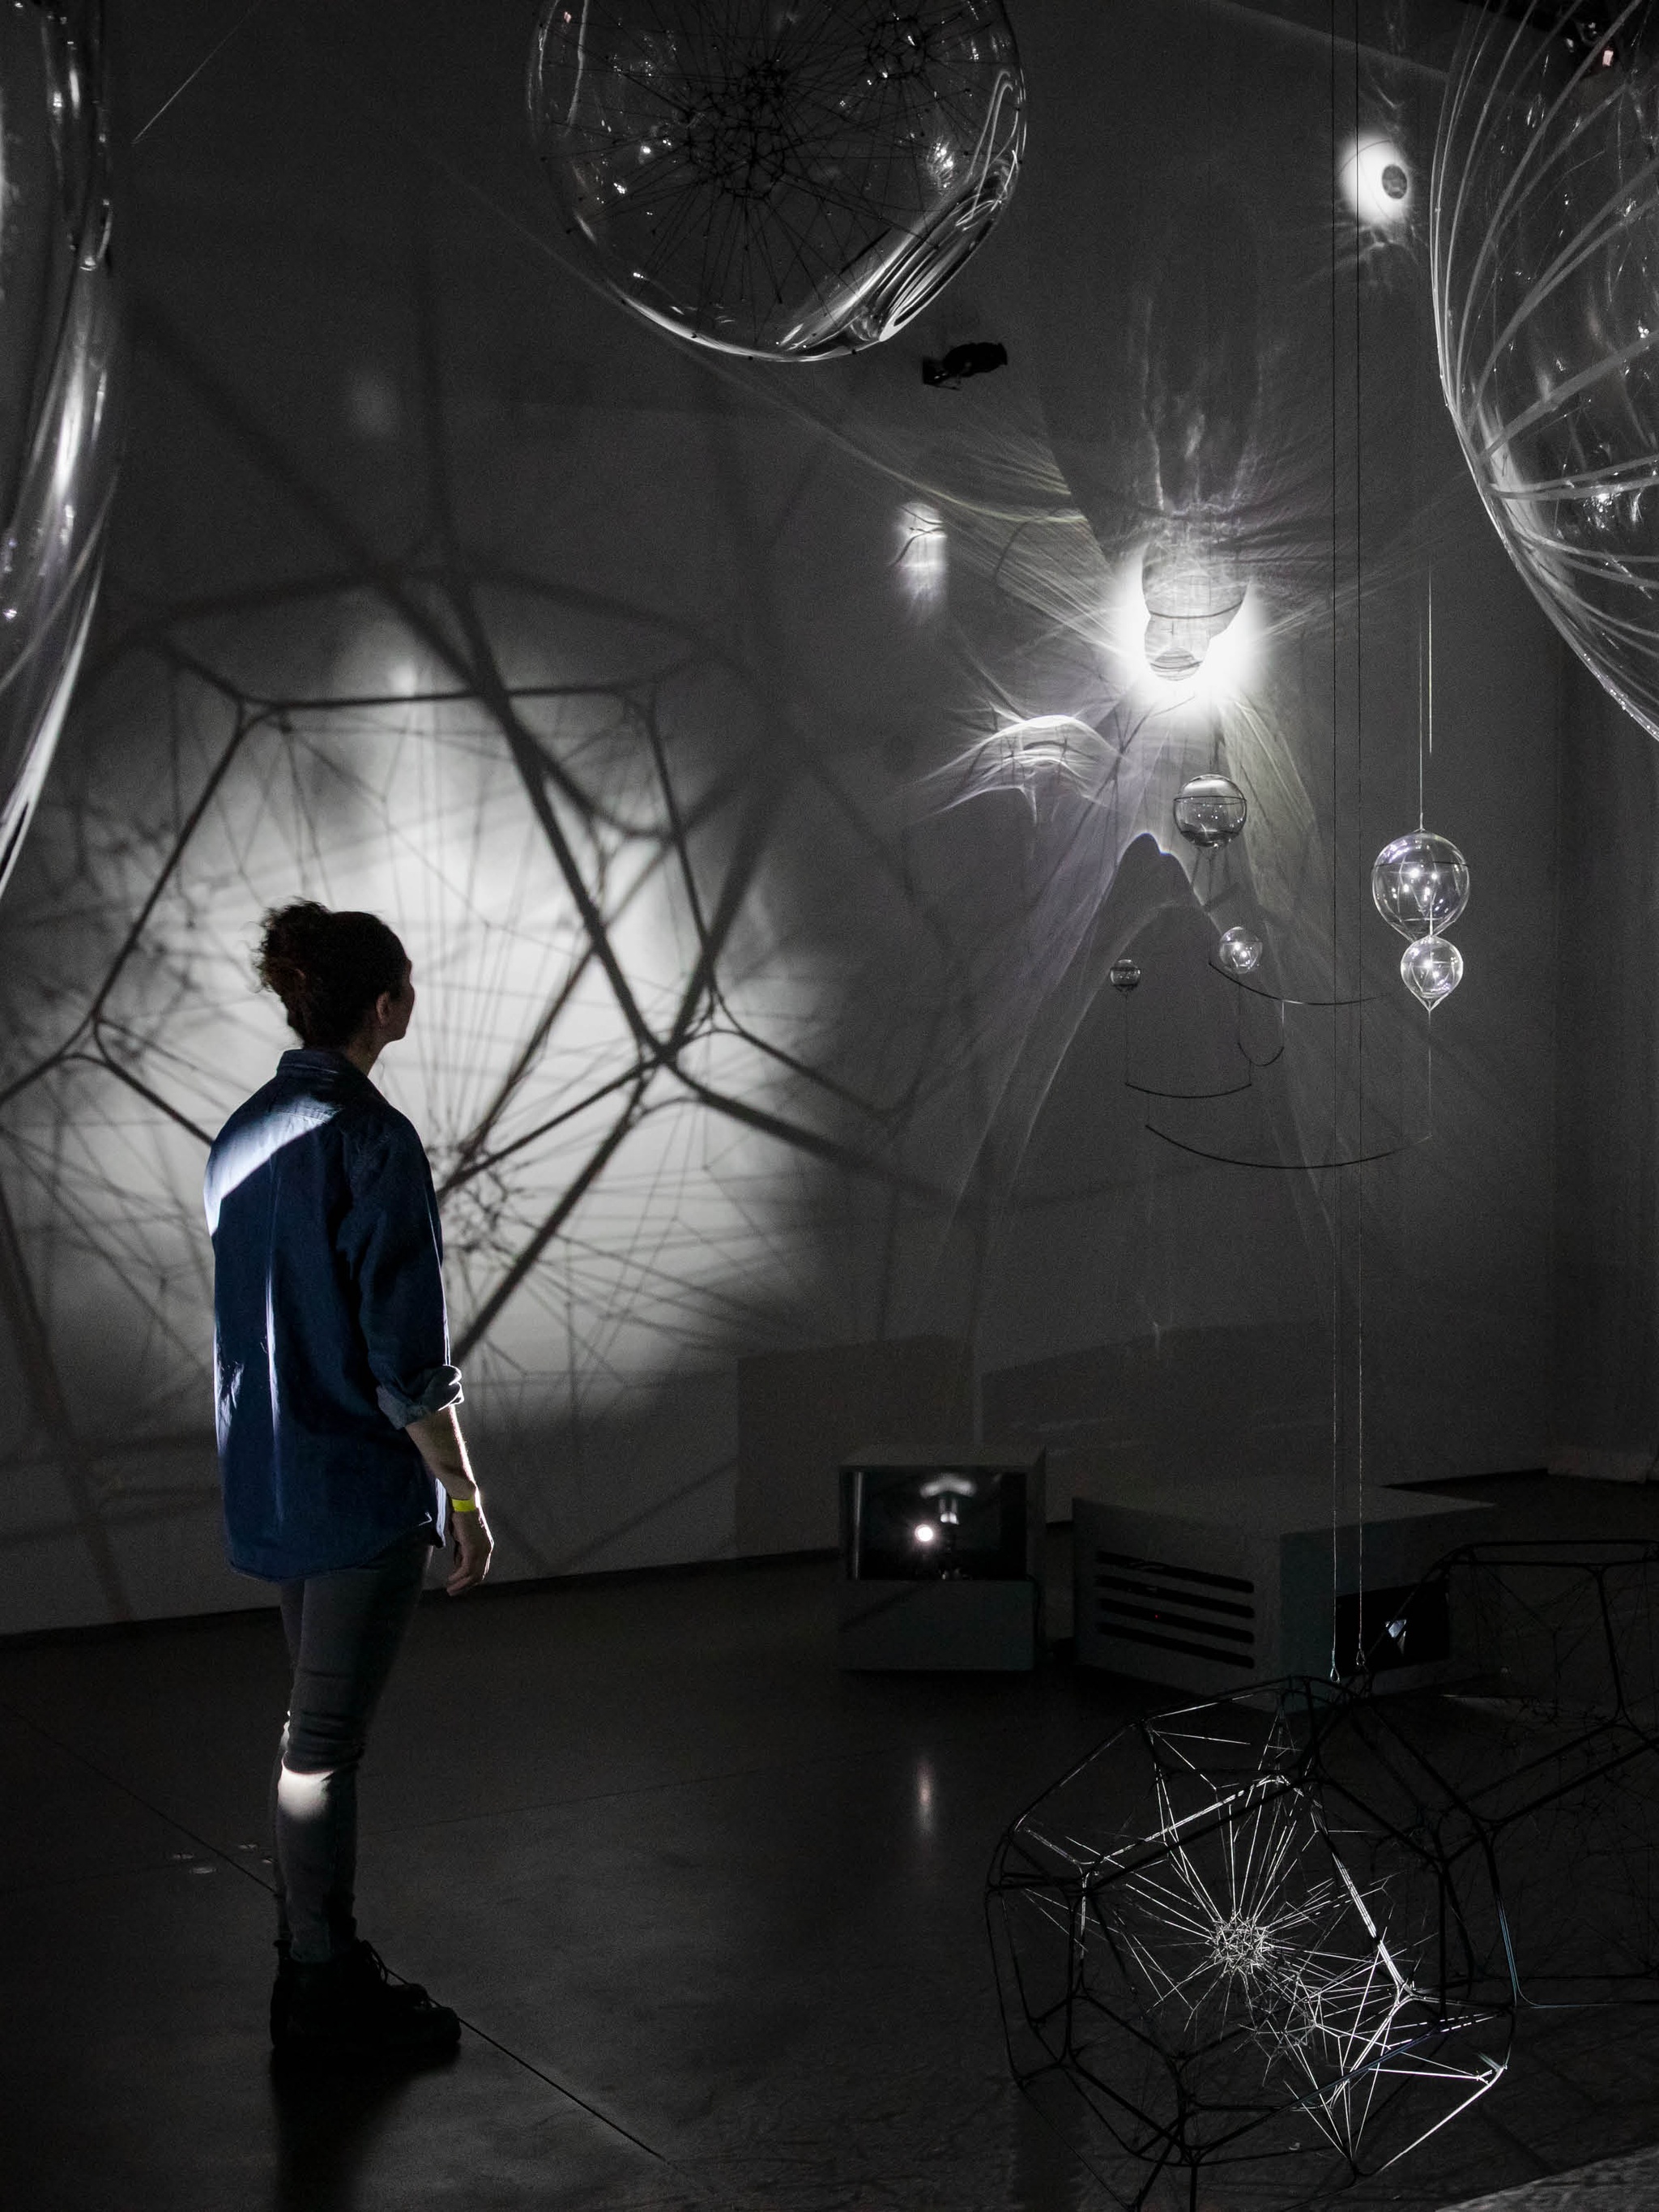 A person stands in shadowy light in an gallery with light refracted through hanging orbs and other sculptures